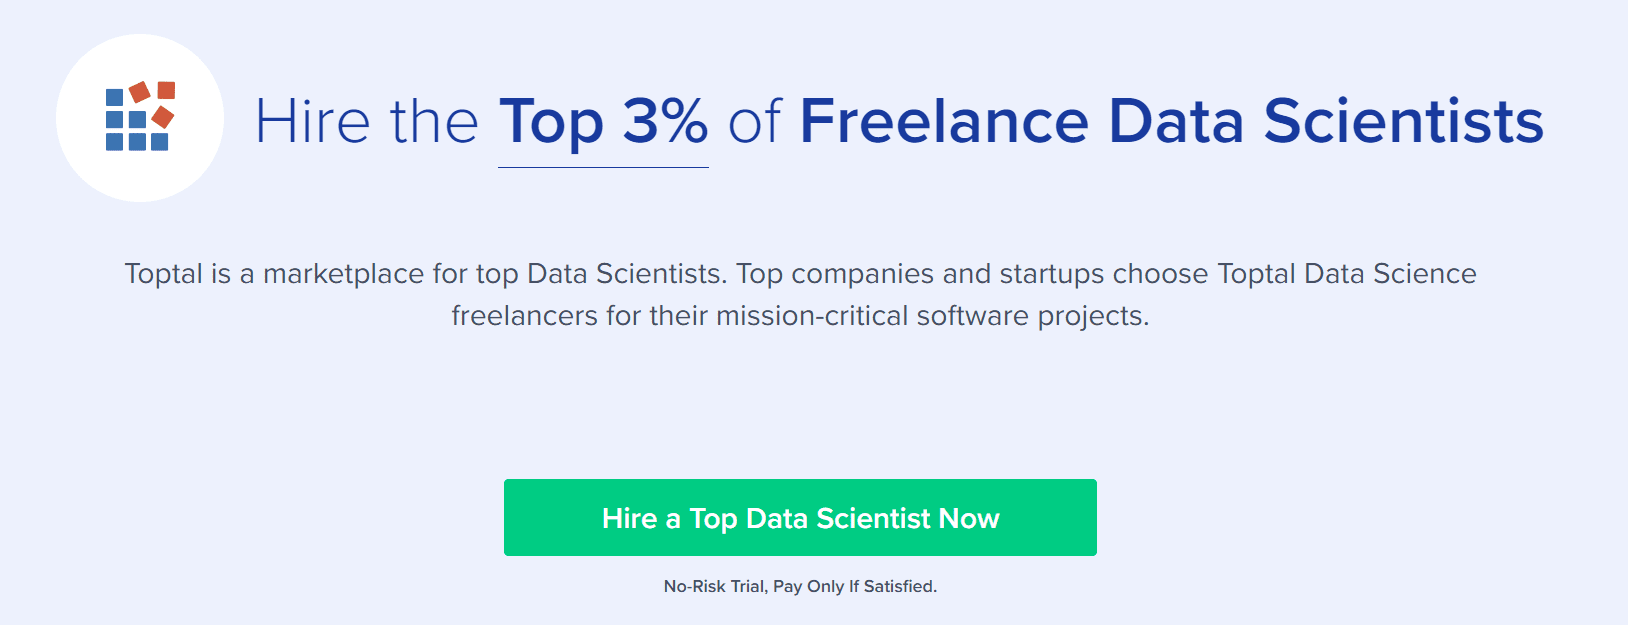 7 High-Paying Side Hustles for Data Scientists